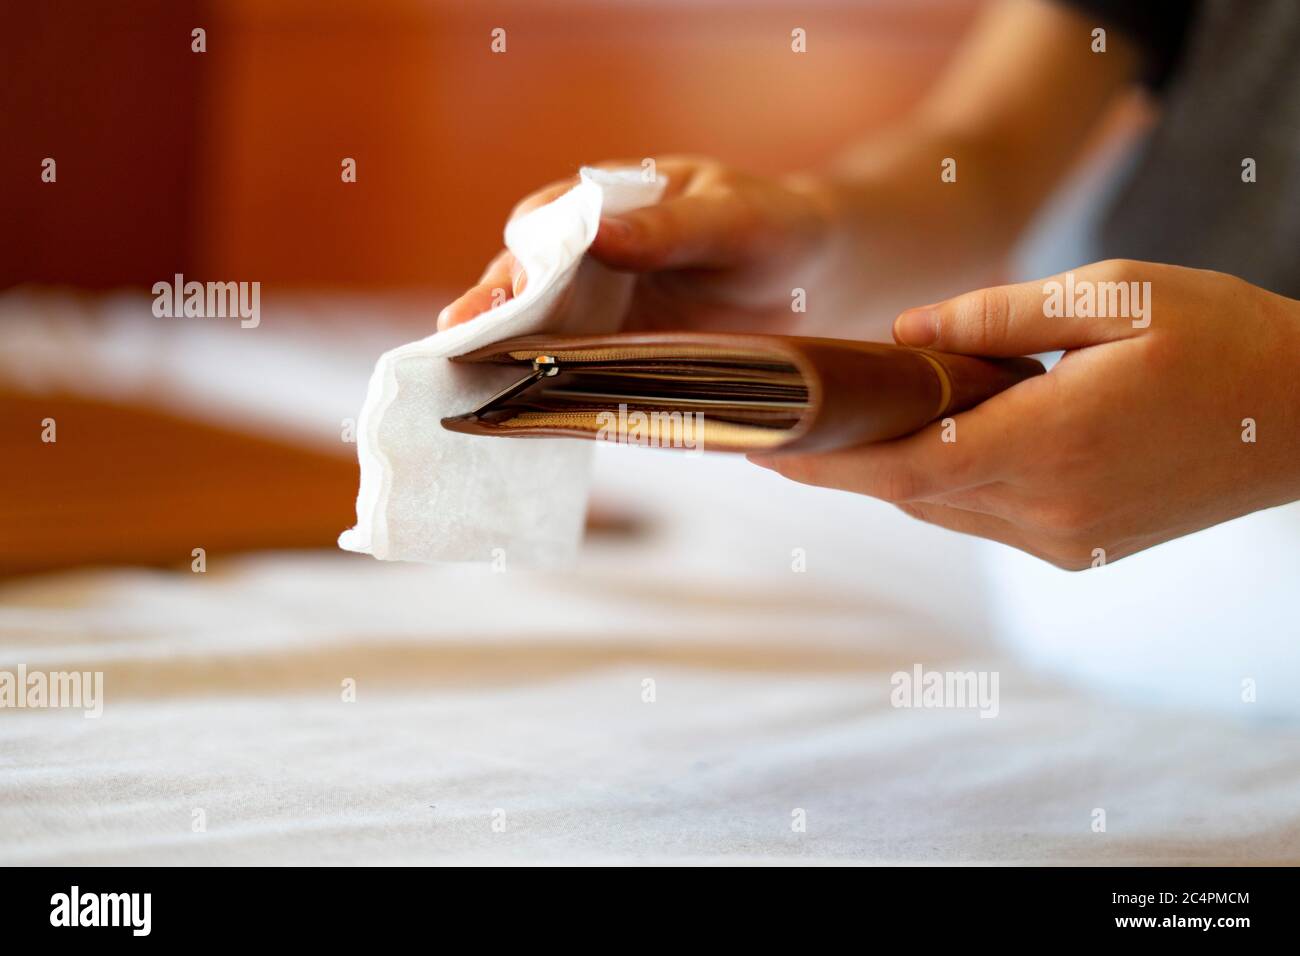 Man disinfecting his wallet with a disinfecting wipe. Concept of disinfecting a wallet. Stock Photo